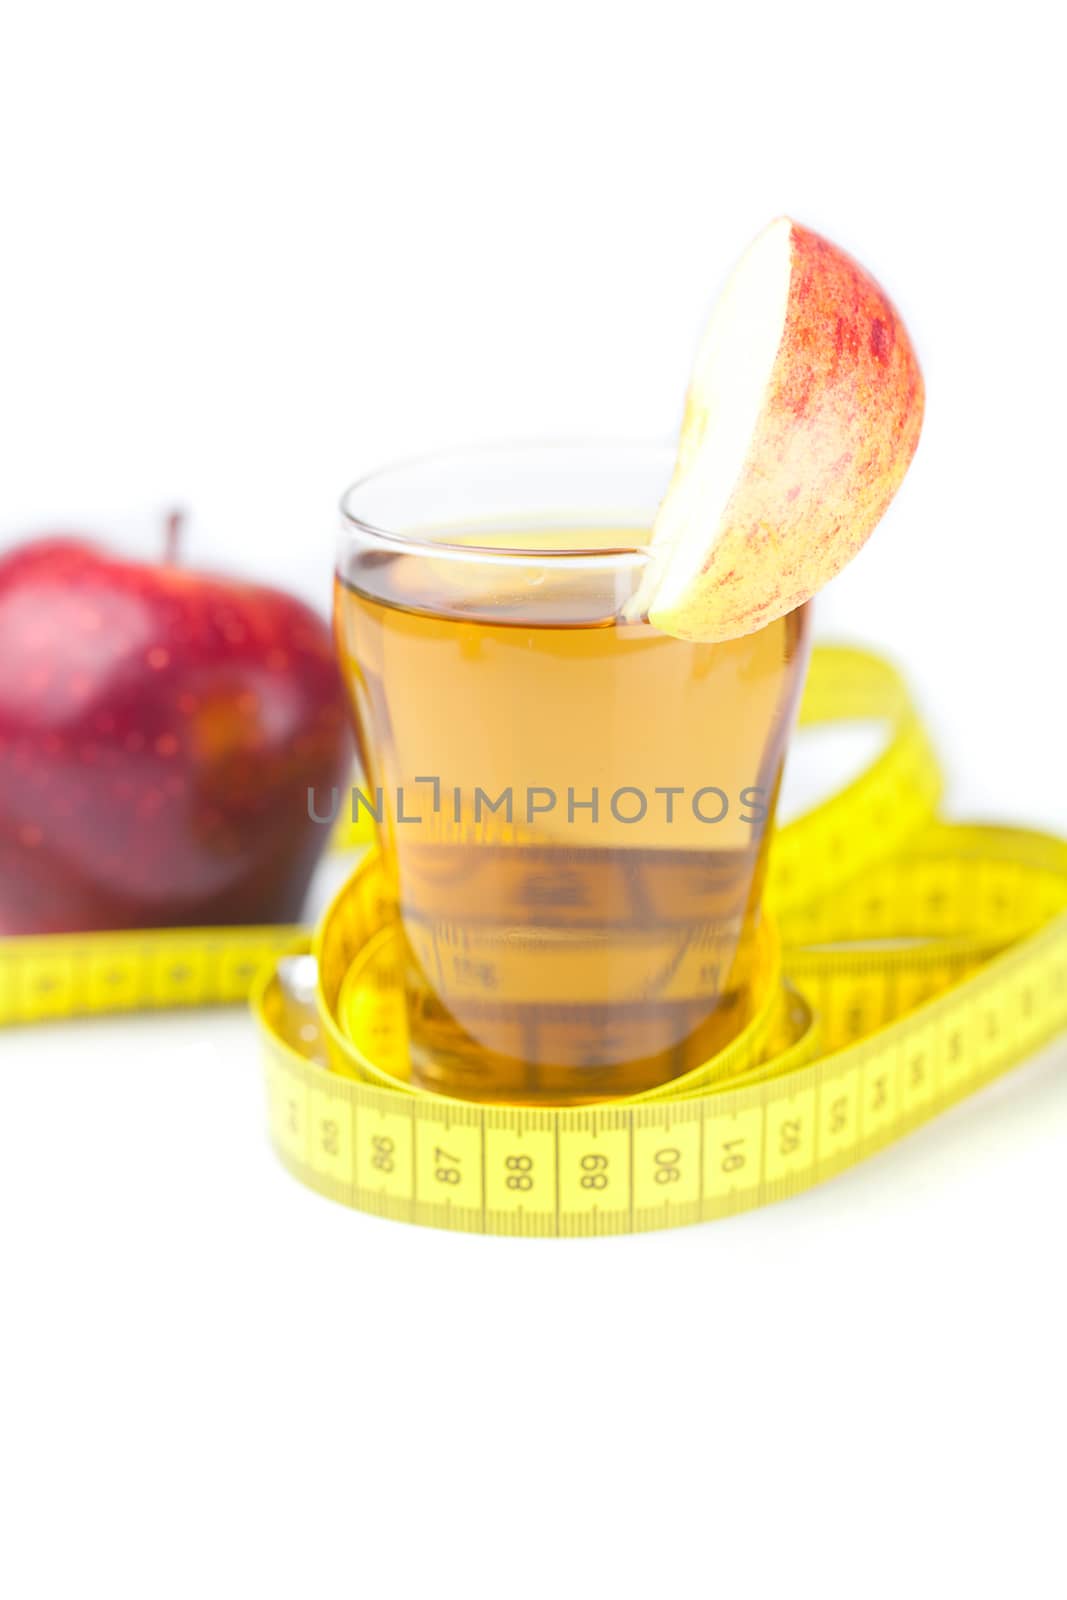 measuring tape,apples and glass of apple juice isolated on white by jannyjus